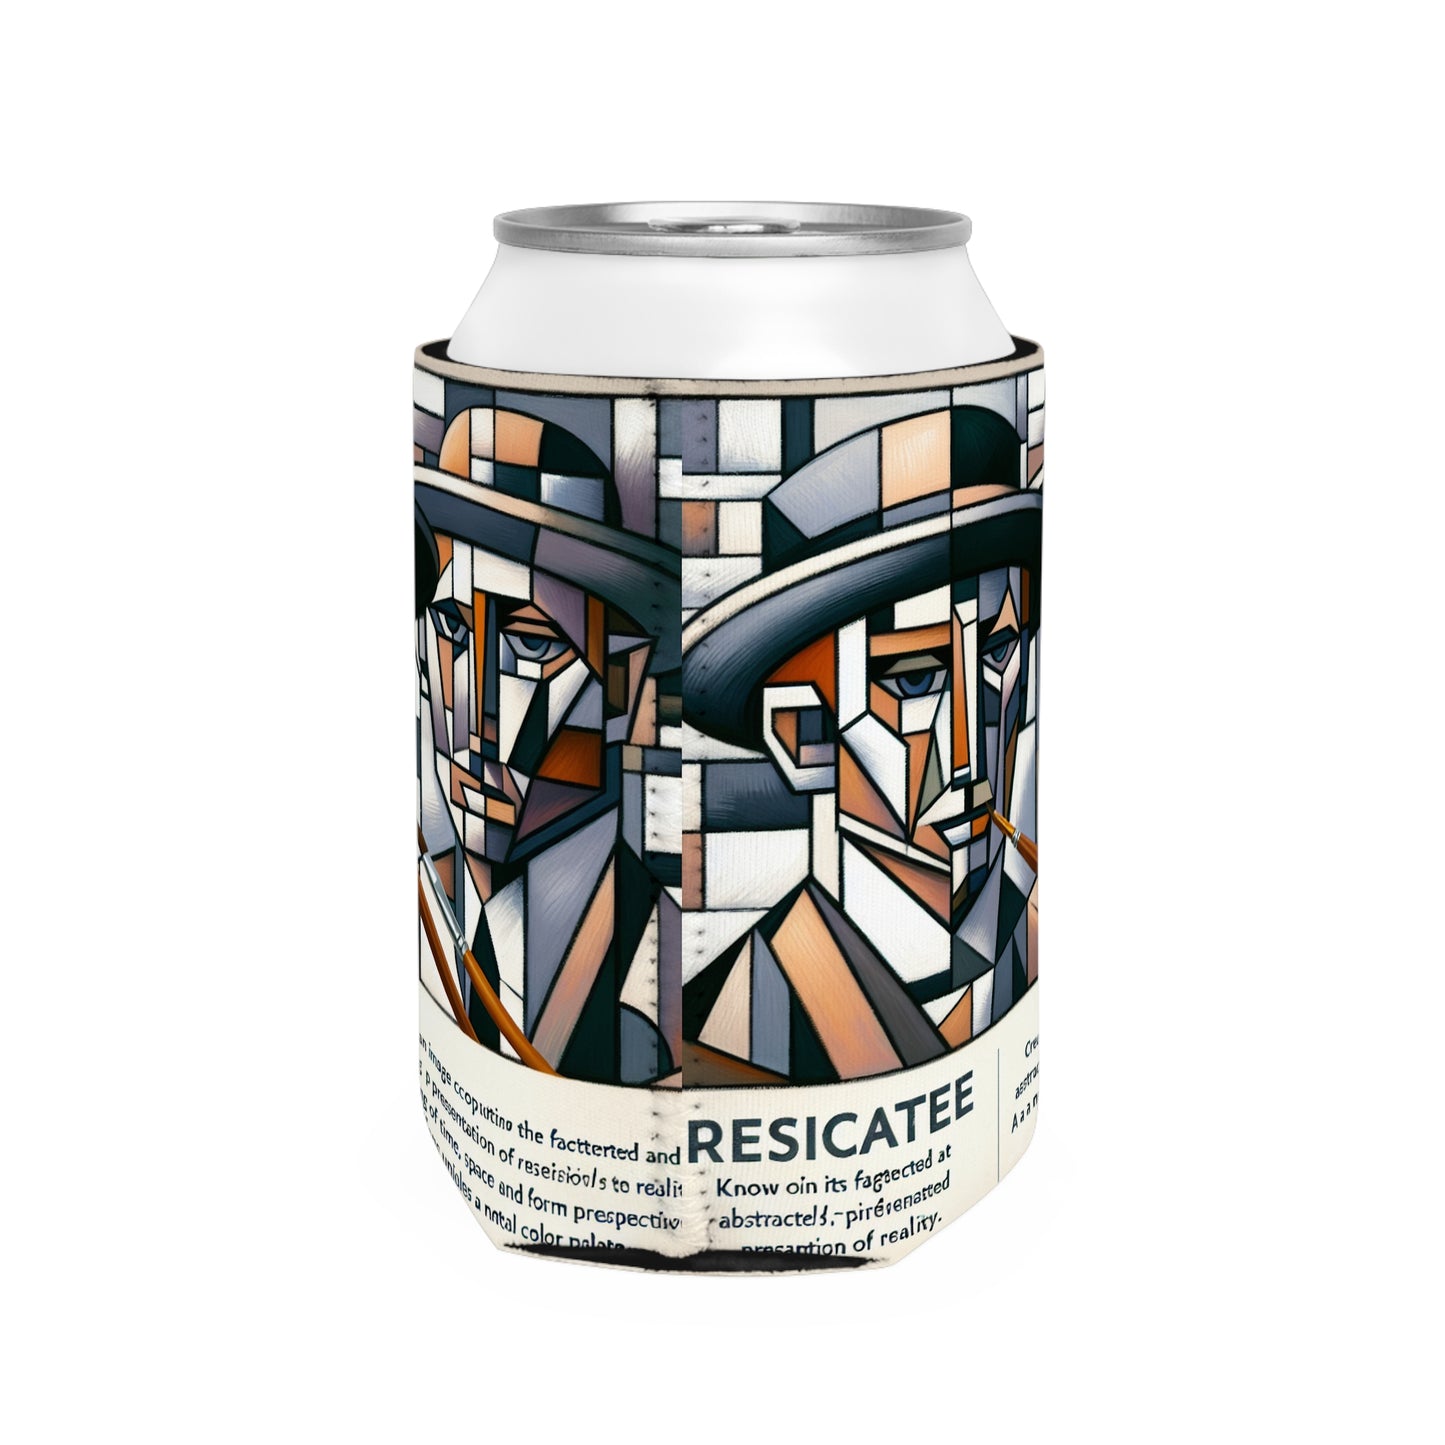 "Cubist Cityscape: Fragmented Views of Urban Energy" - The Alien Can Cooler Sleeve Cubism